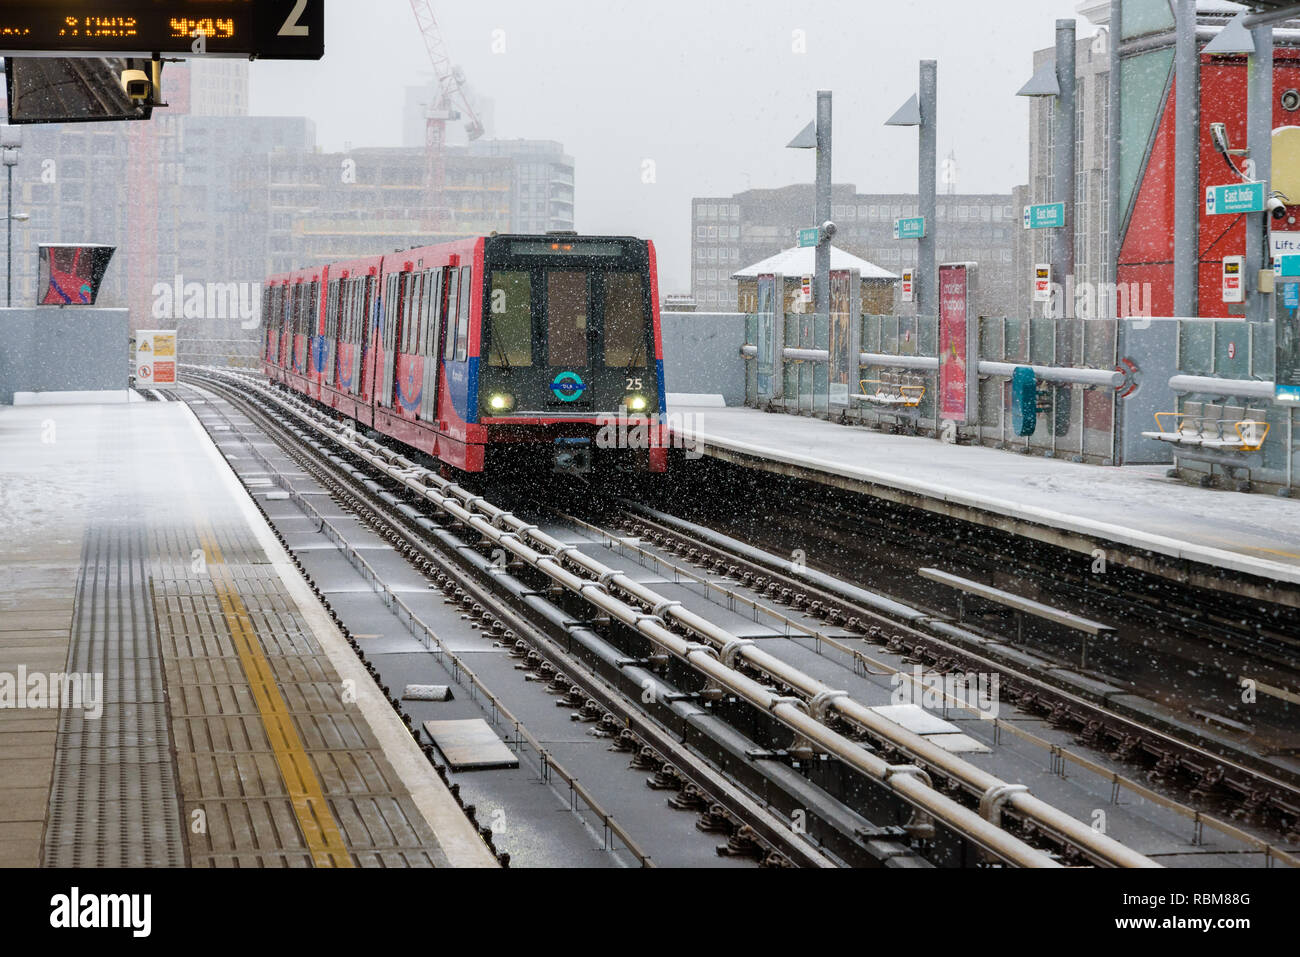 Snow falling on a DLR train approaching East India station in Poplar, London, England. Stock Photo